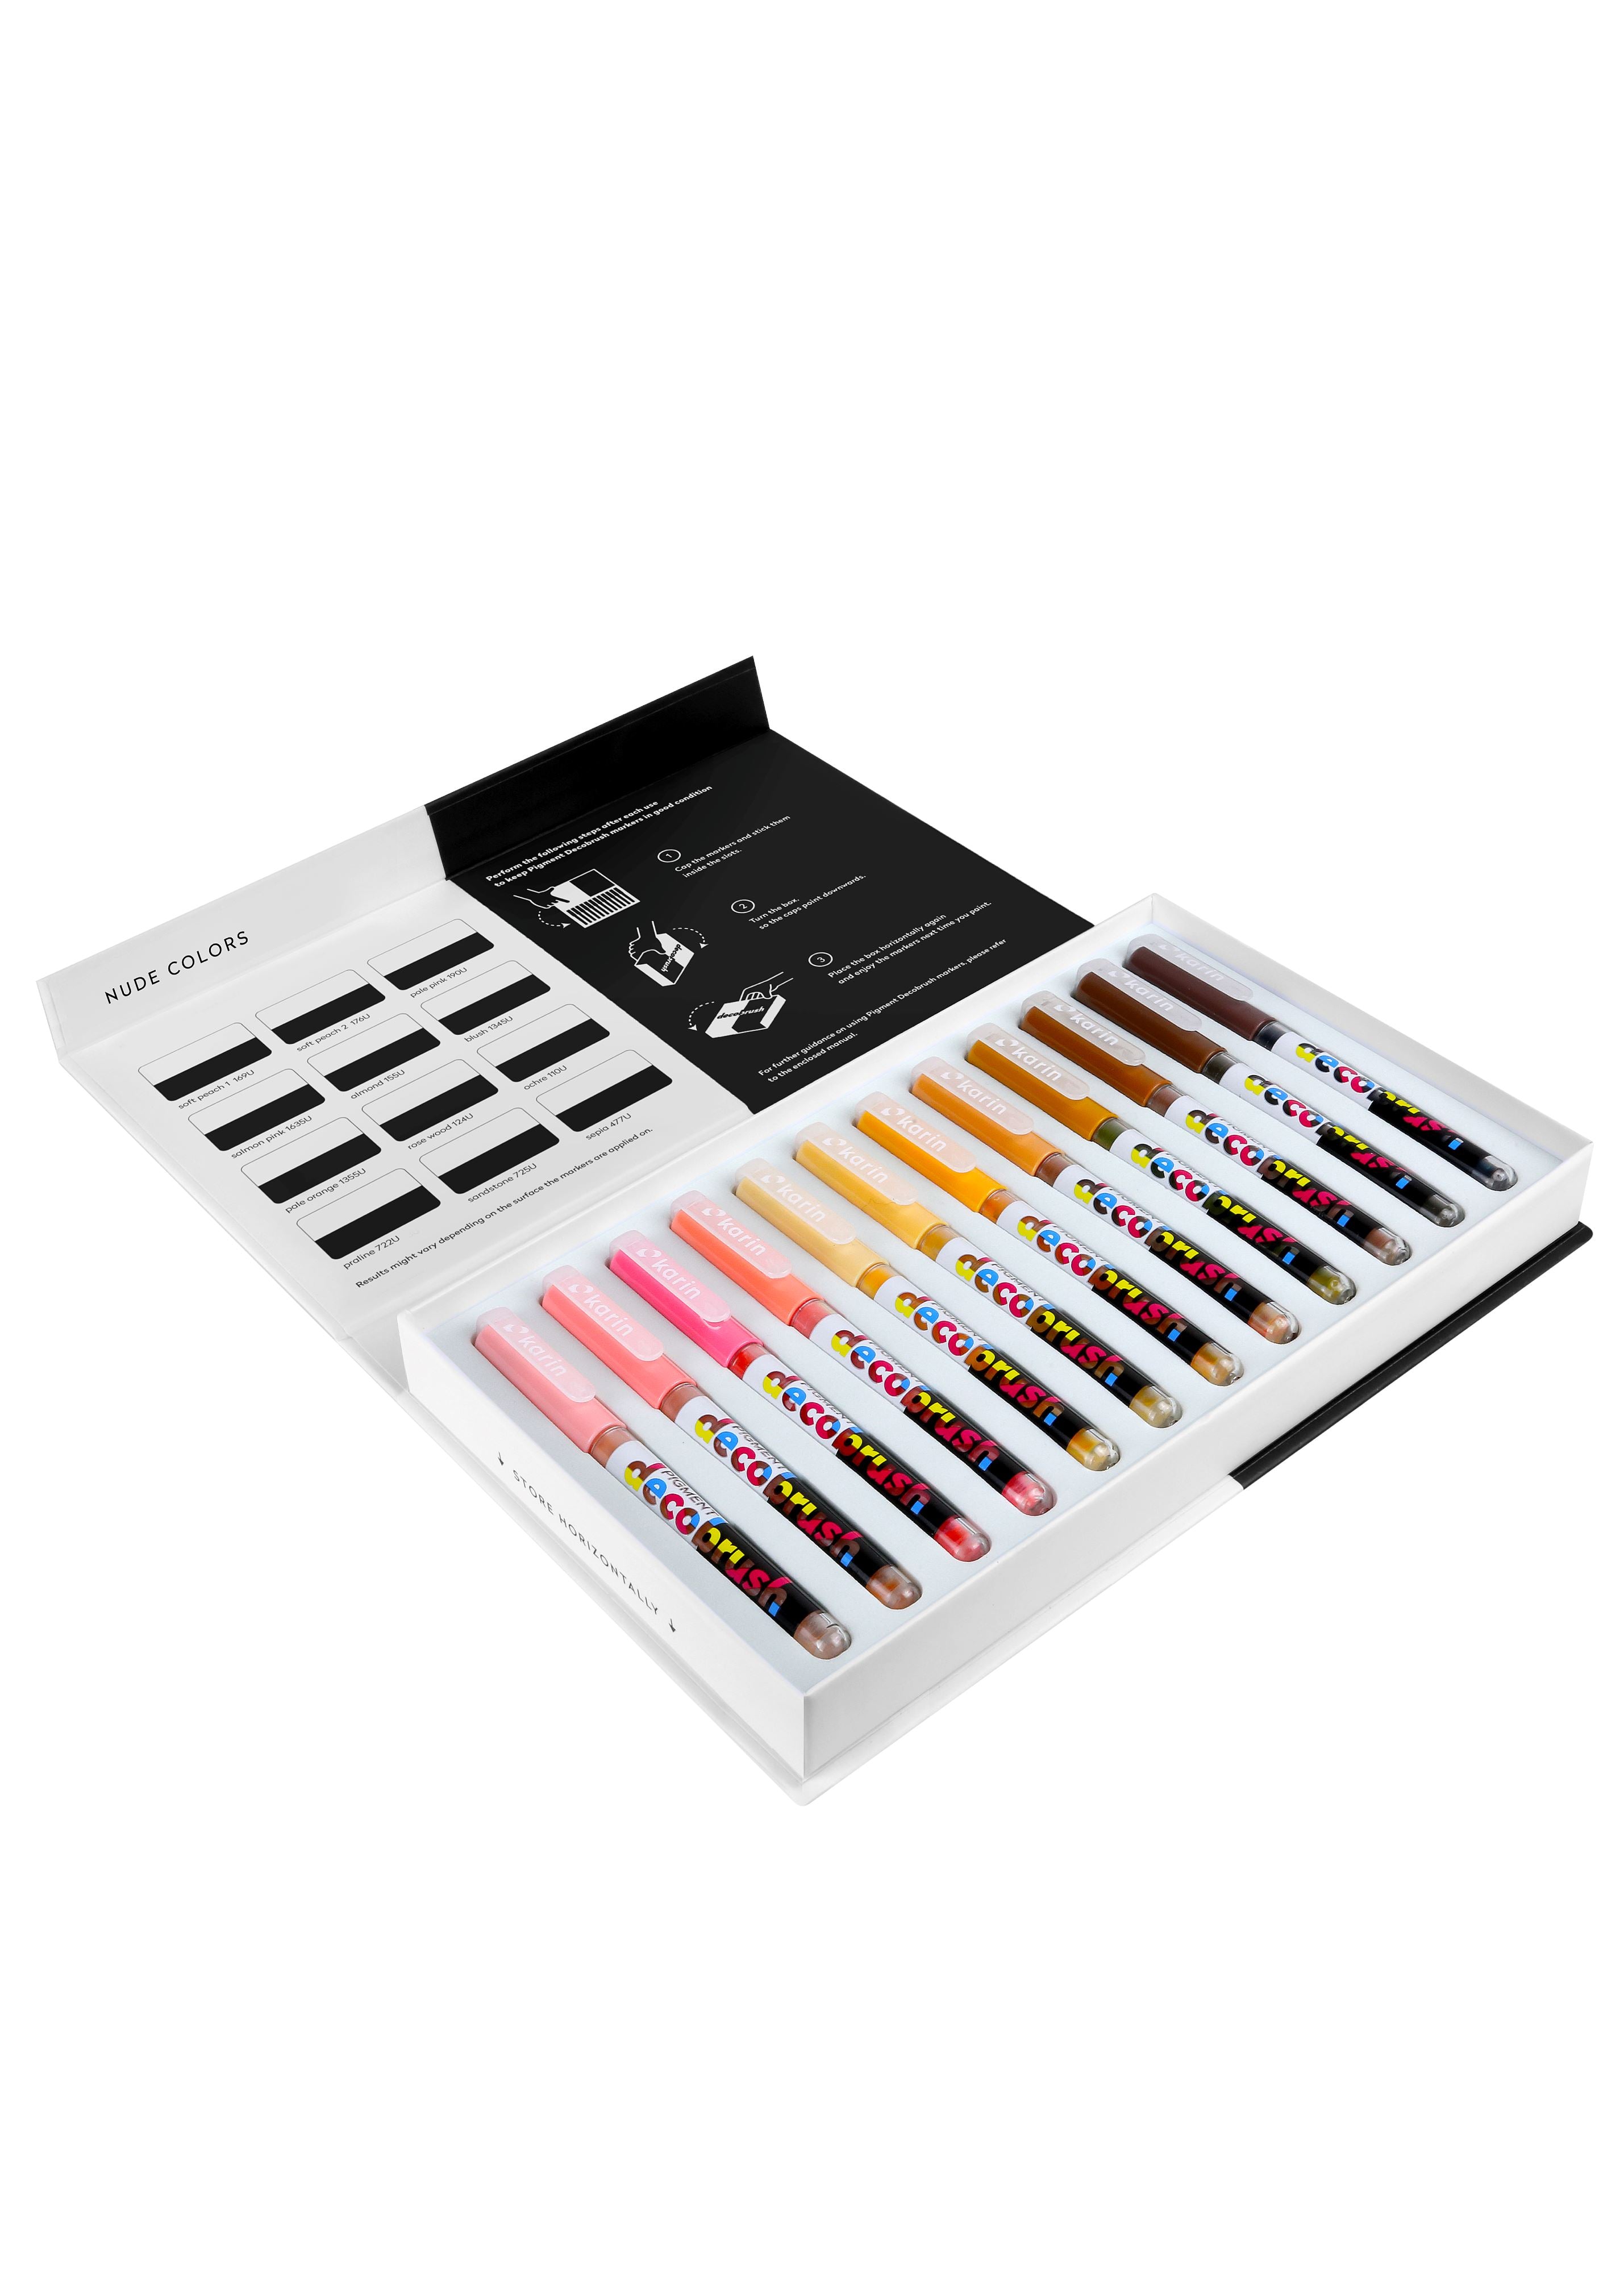 Karin markers Pigment Decobrush | Nude Colors Collection 12 colors marcadores, plumones Karin